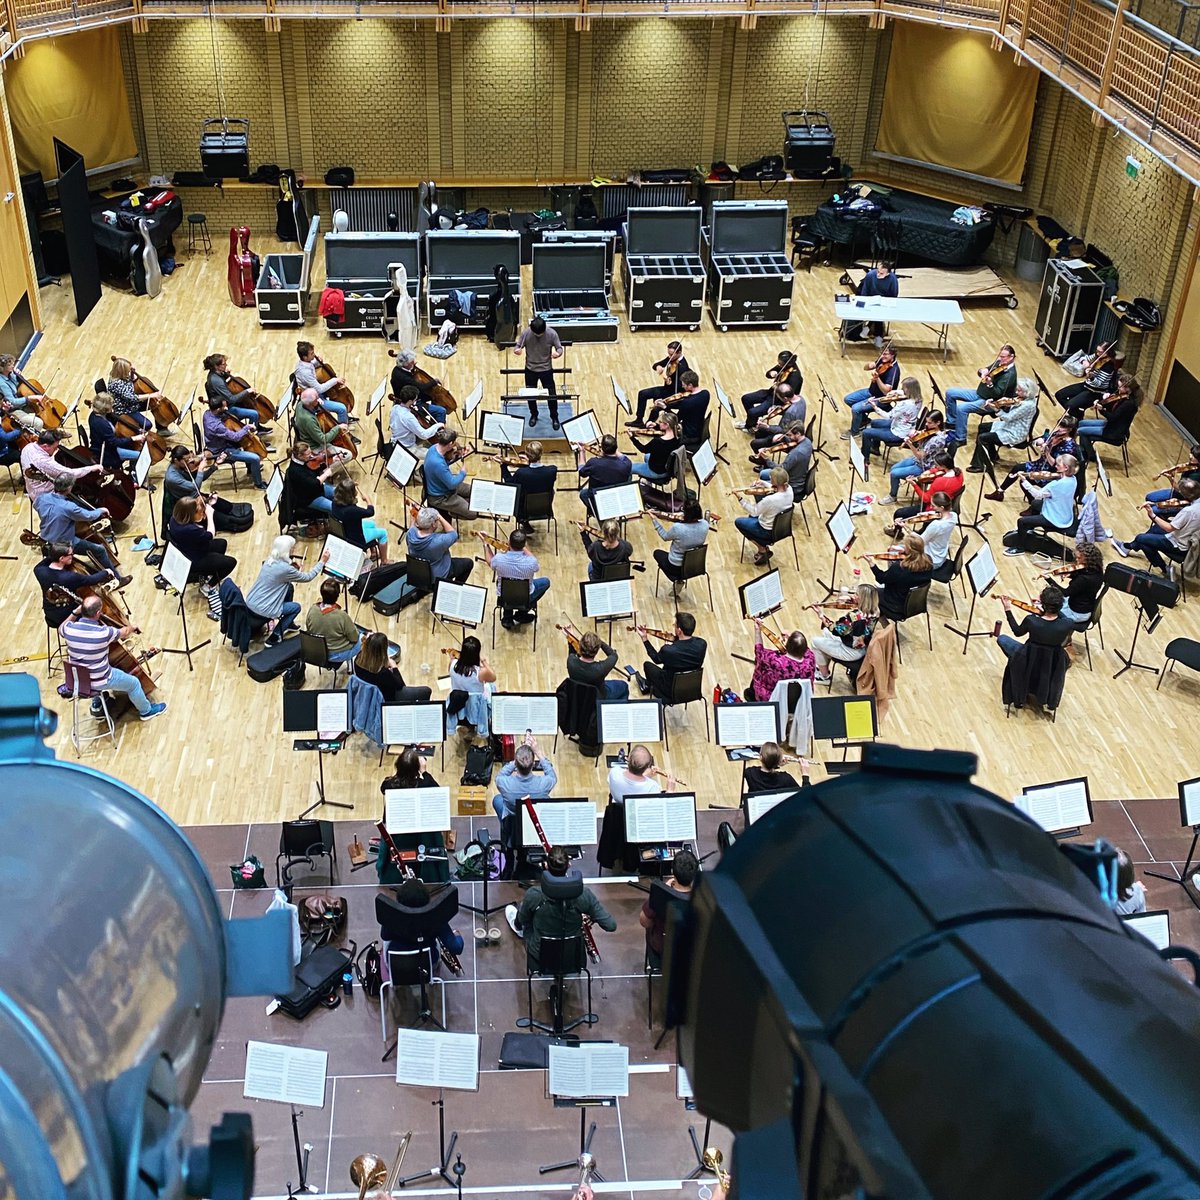 First day of @TheCBSO rehearsals after the summer break - preparing for our 2022/23 season opening concert on Tuesday with @yamakazu_takt and @NickyBenedetti (and sounding 👌 from my secret spot behind the lights)